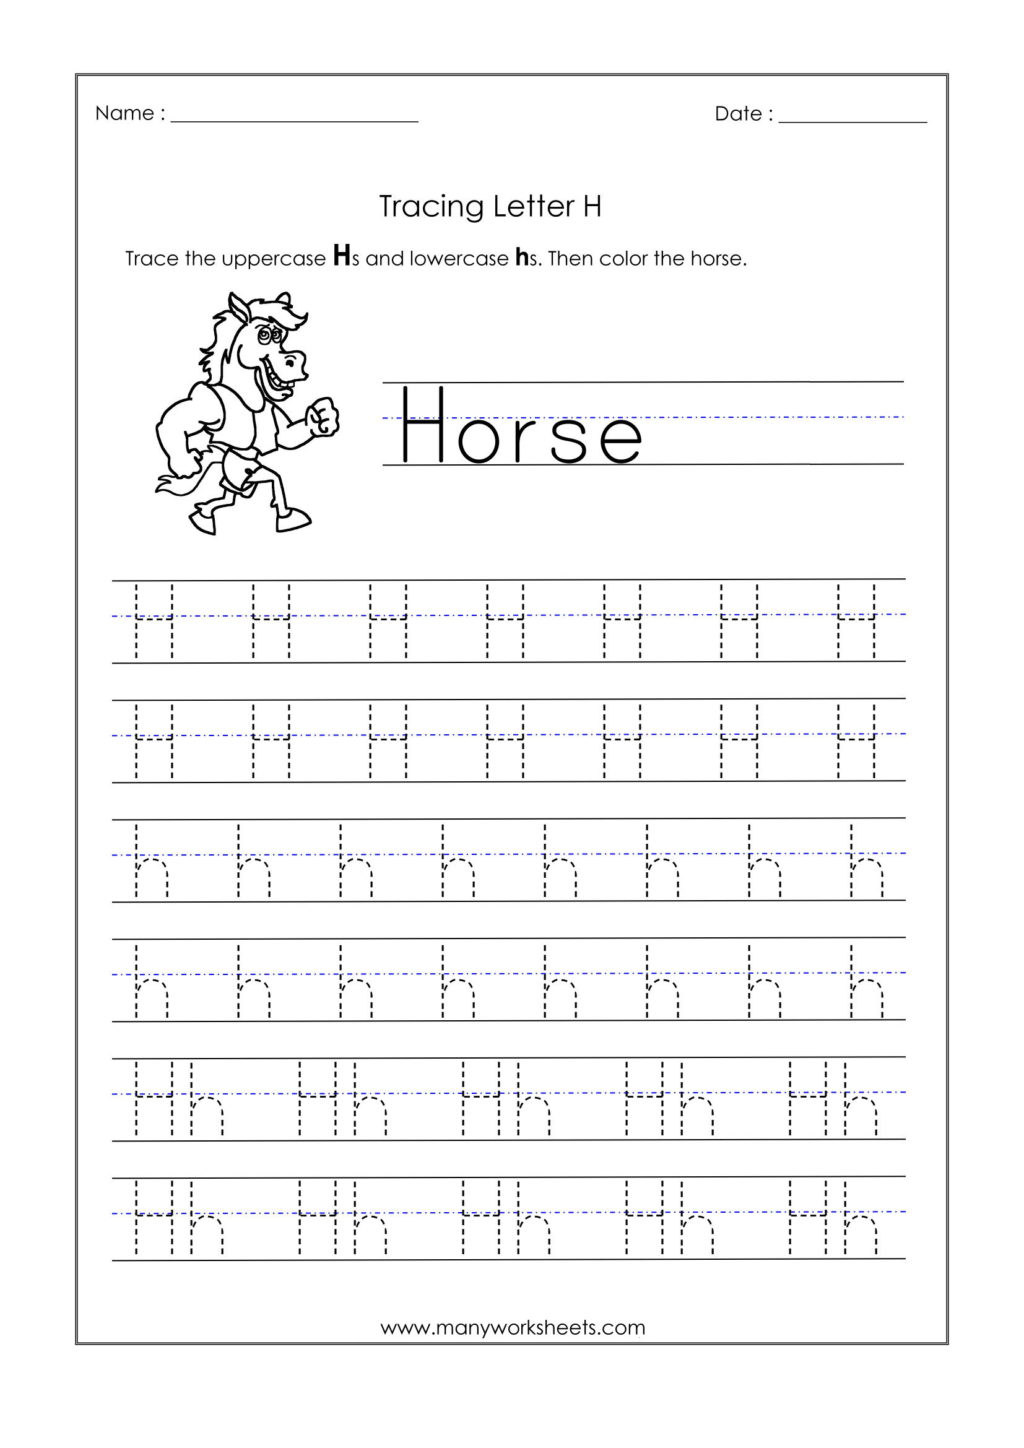 Worksheet ~ Remarkable Free Name Tracing Worksheets Photo in H Letter Tracing